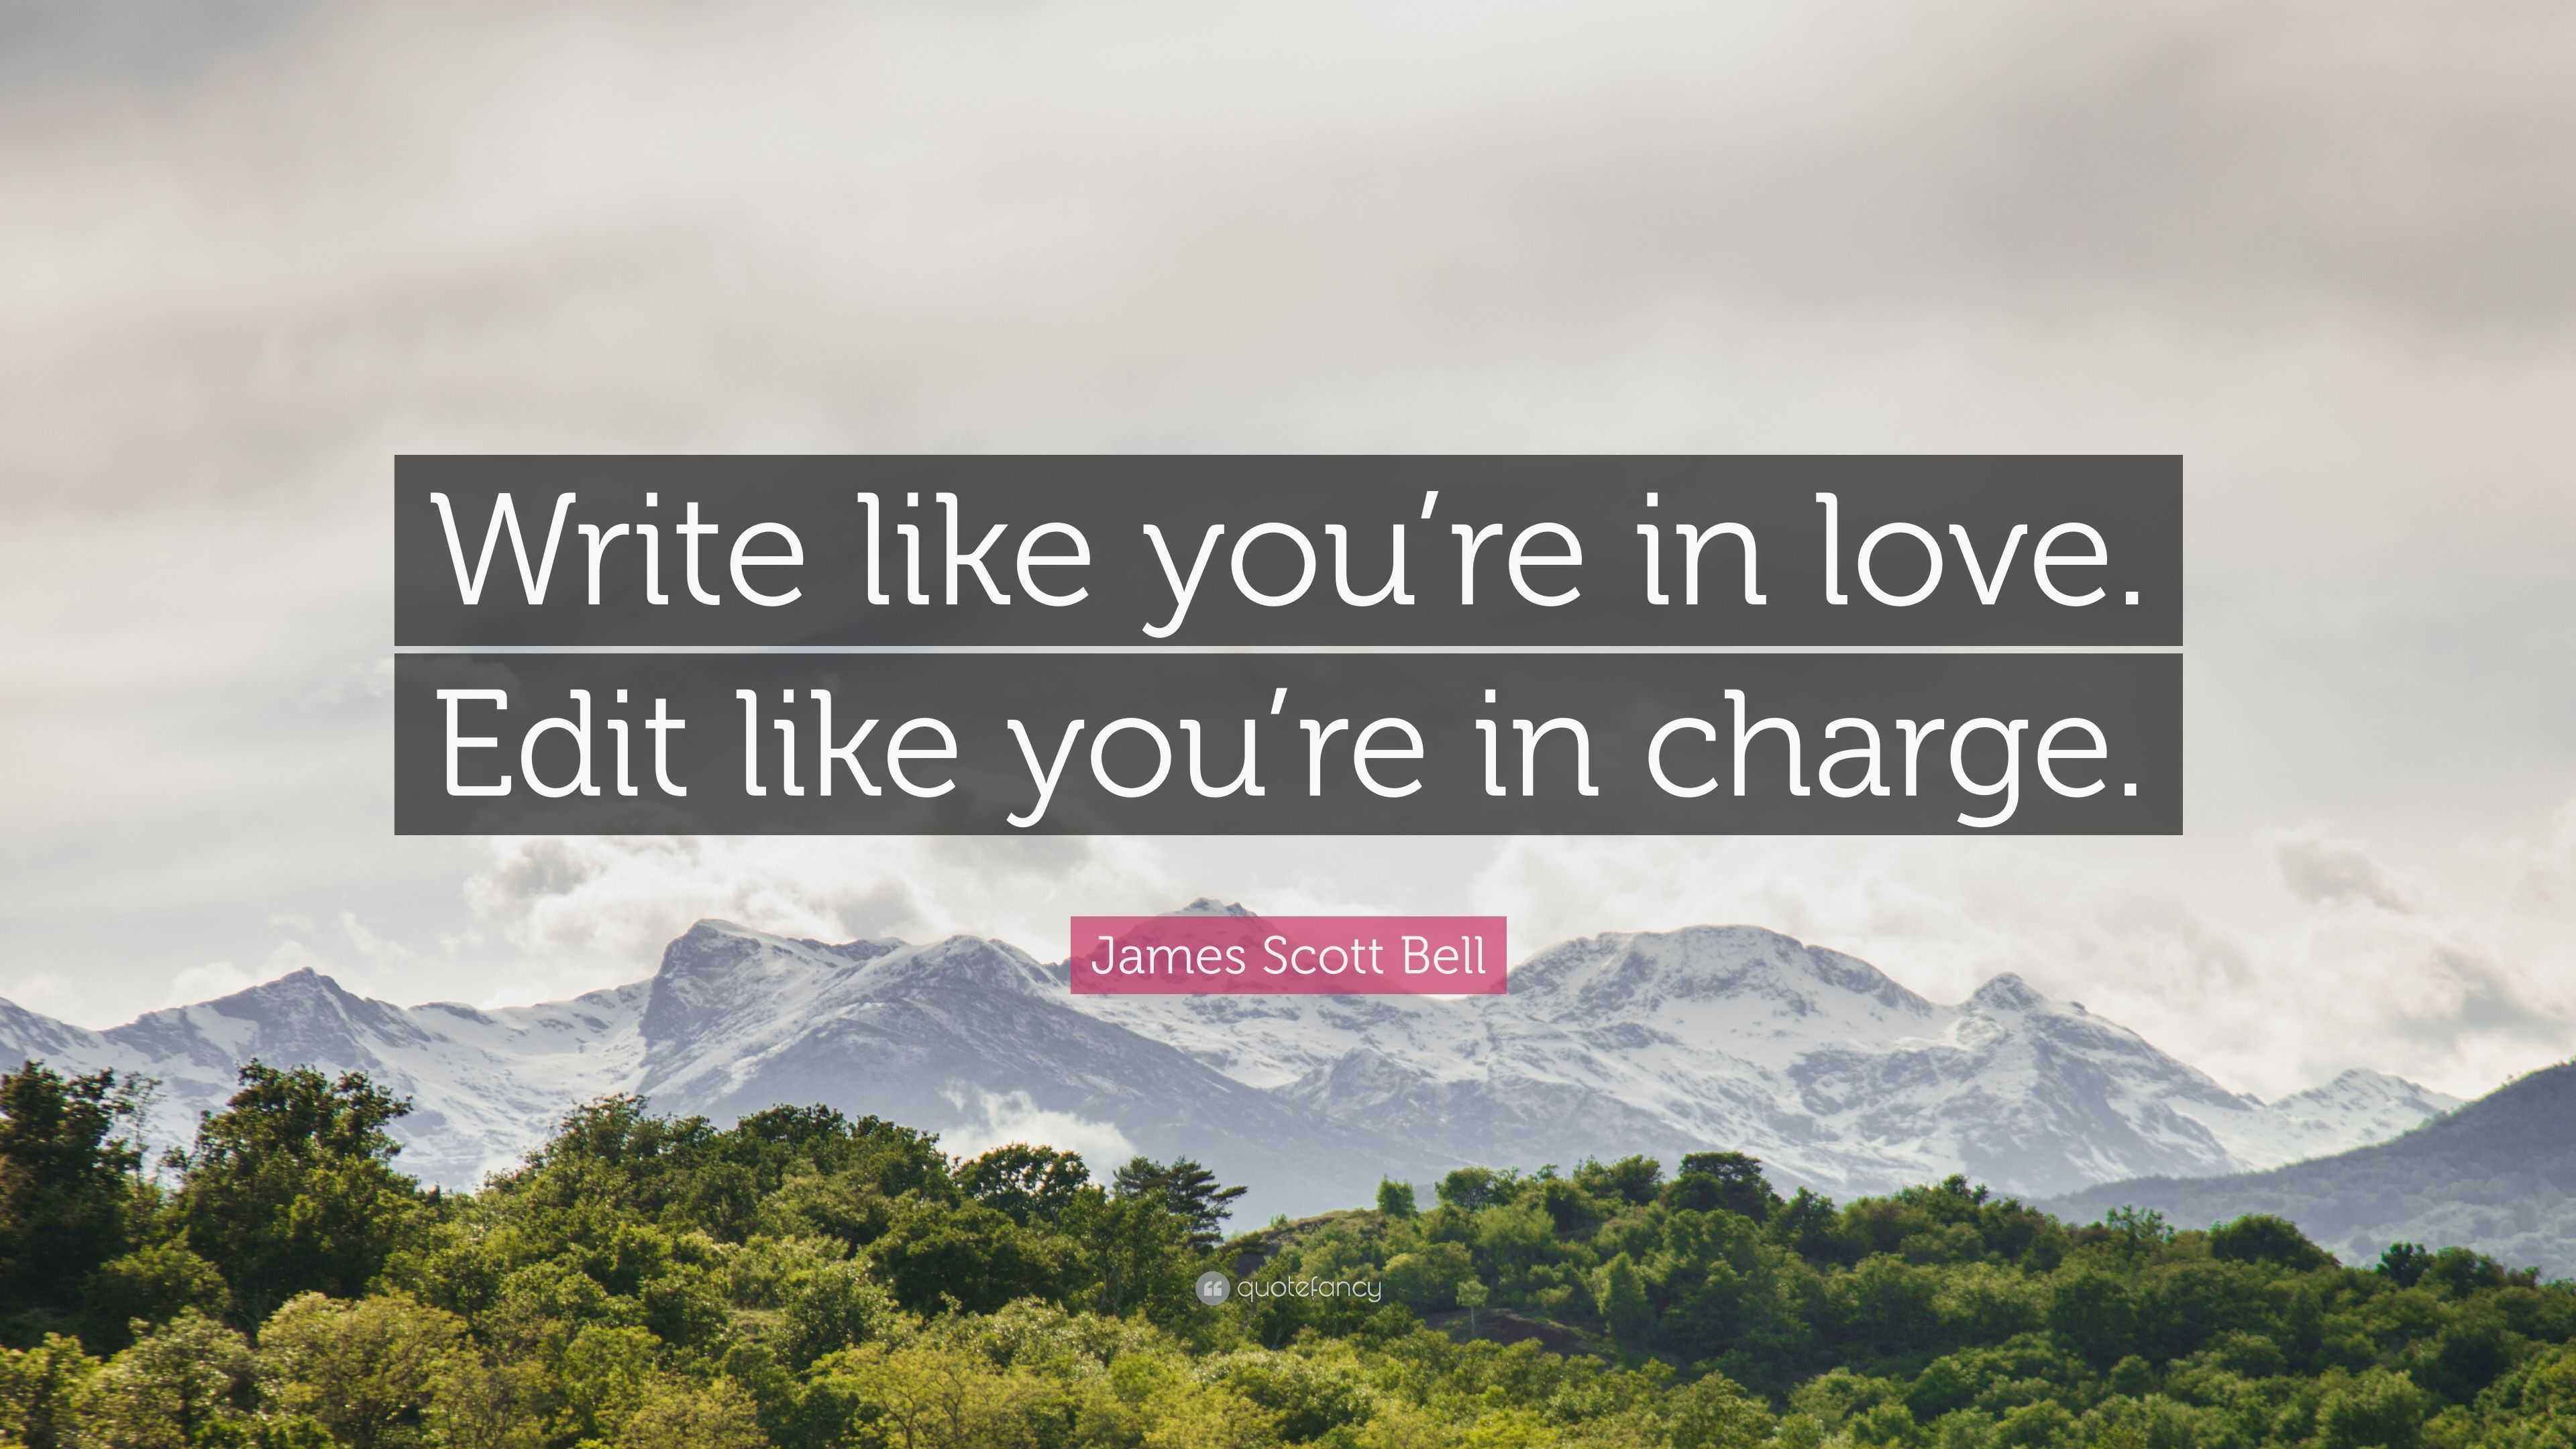 James Scott Bell Quote: “Write like you're in love. Edit like you're in  charge.”